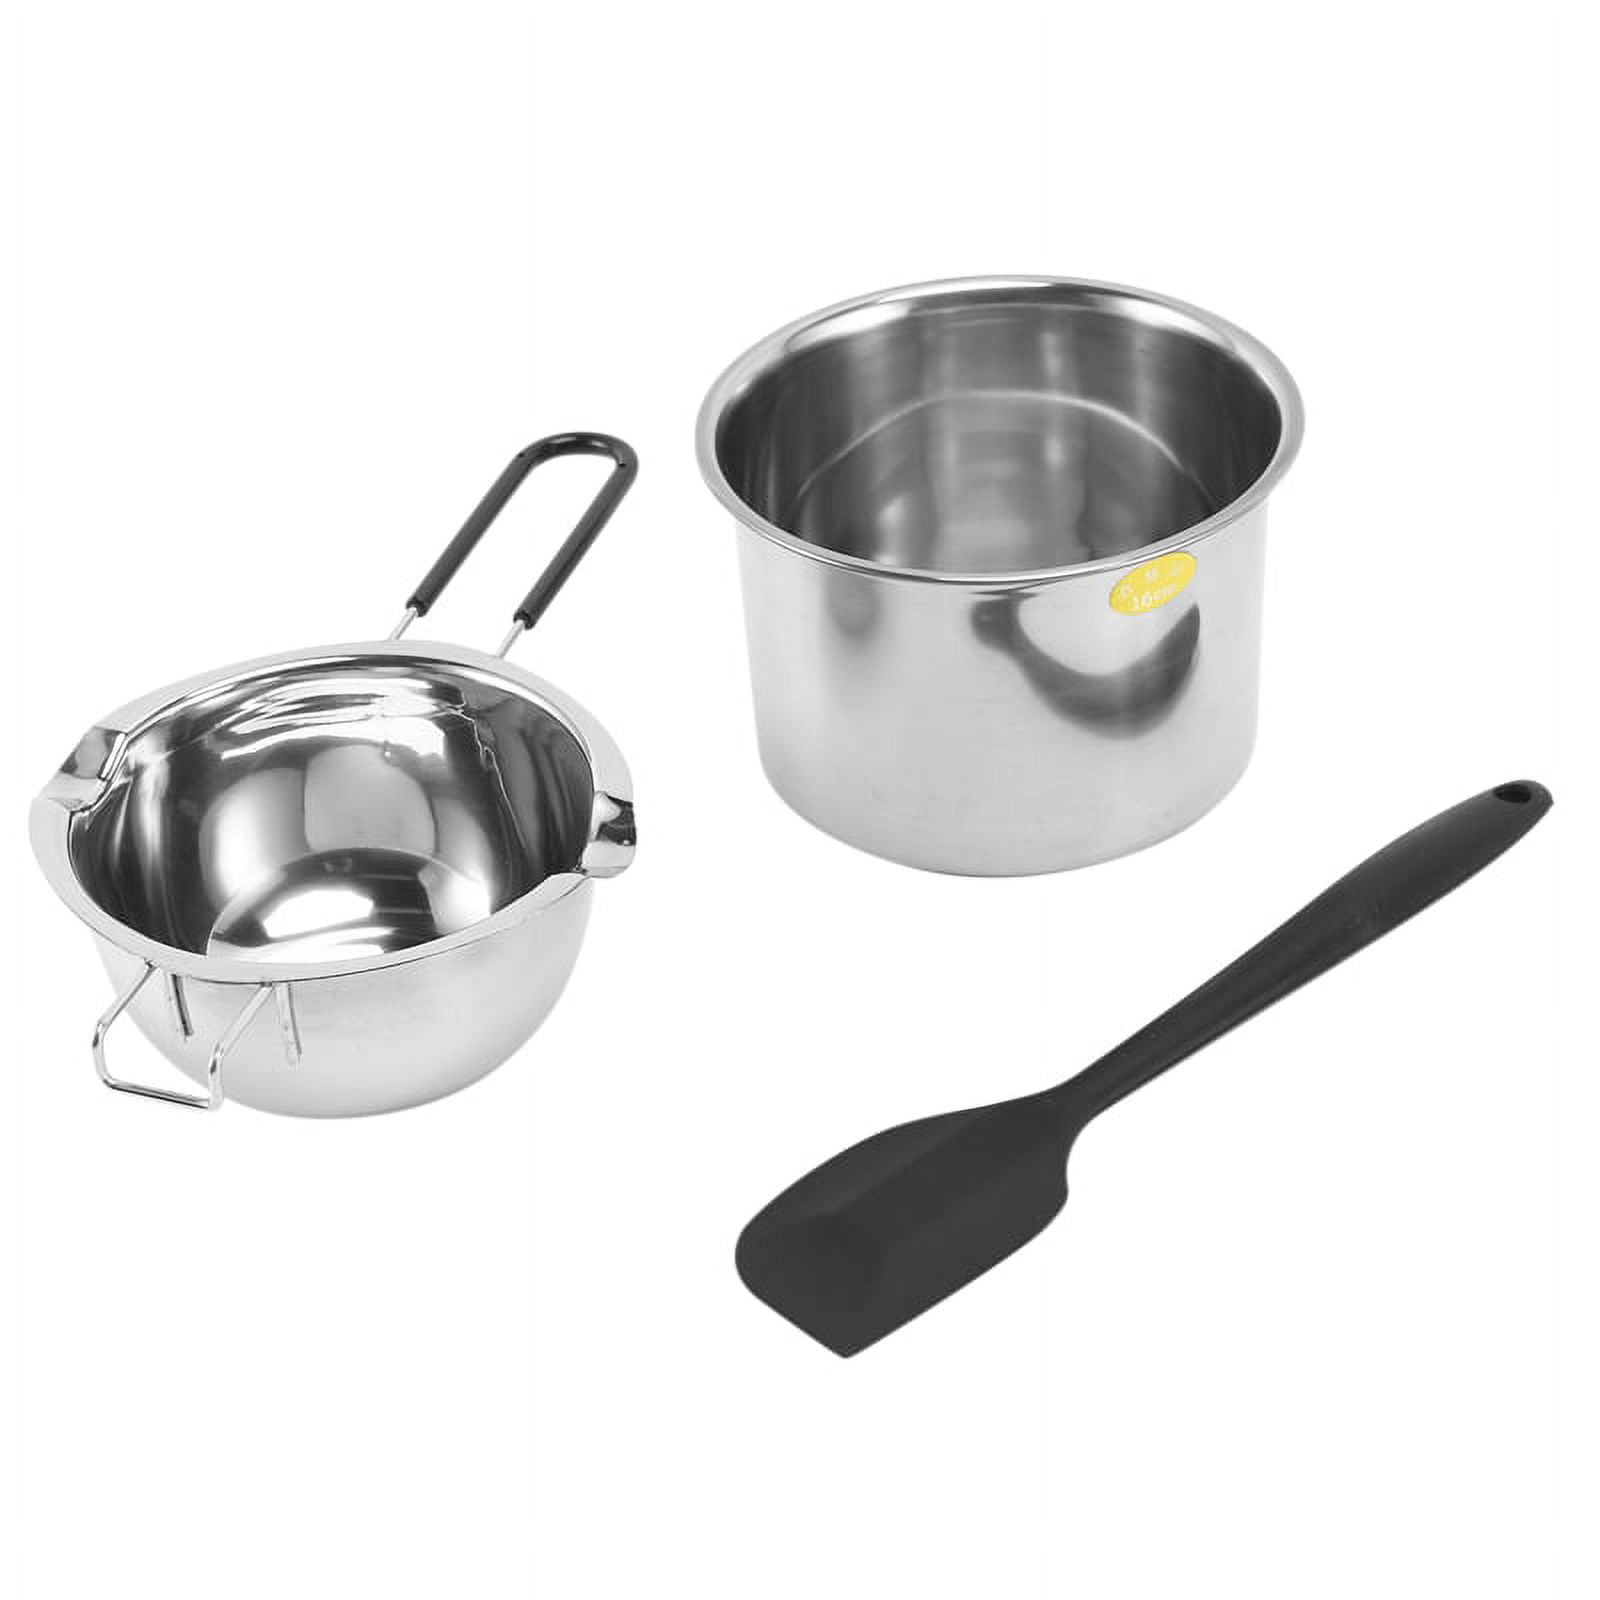 4 Set Stainless Steel Double Boiler Long Handle Wax Melting Pot